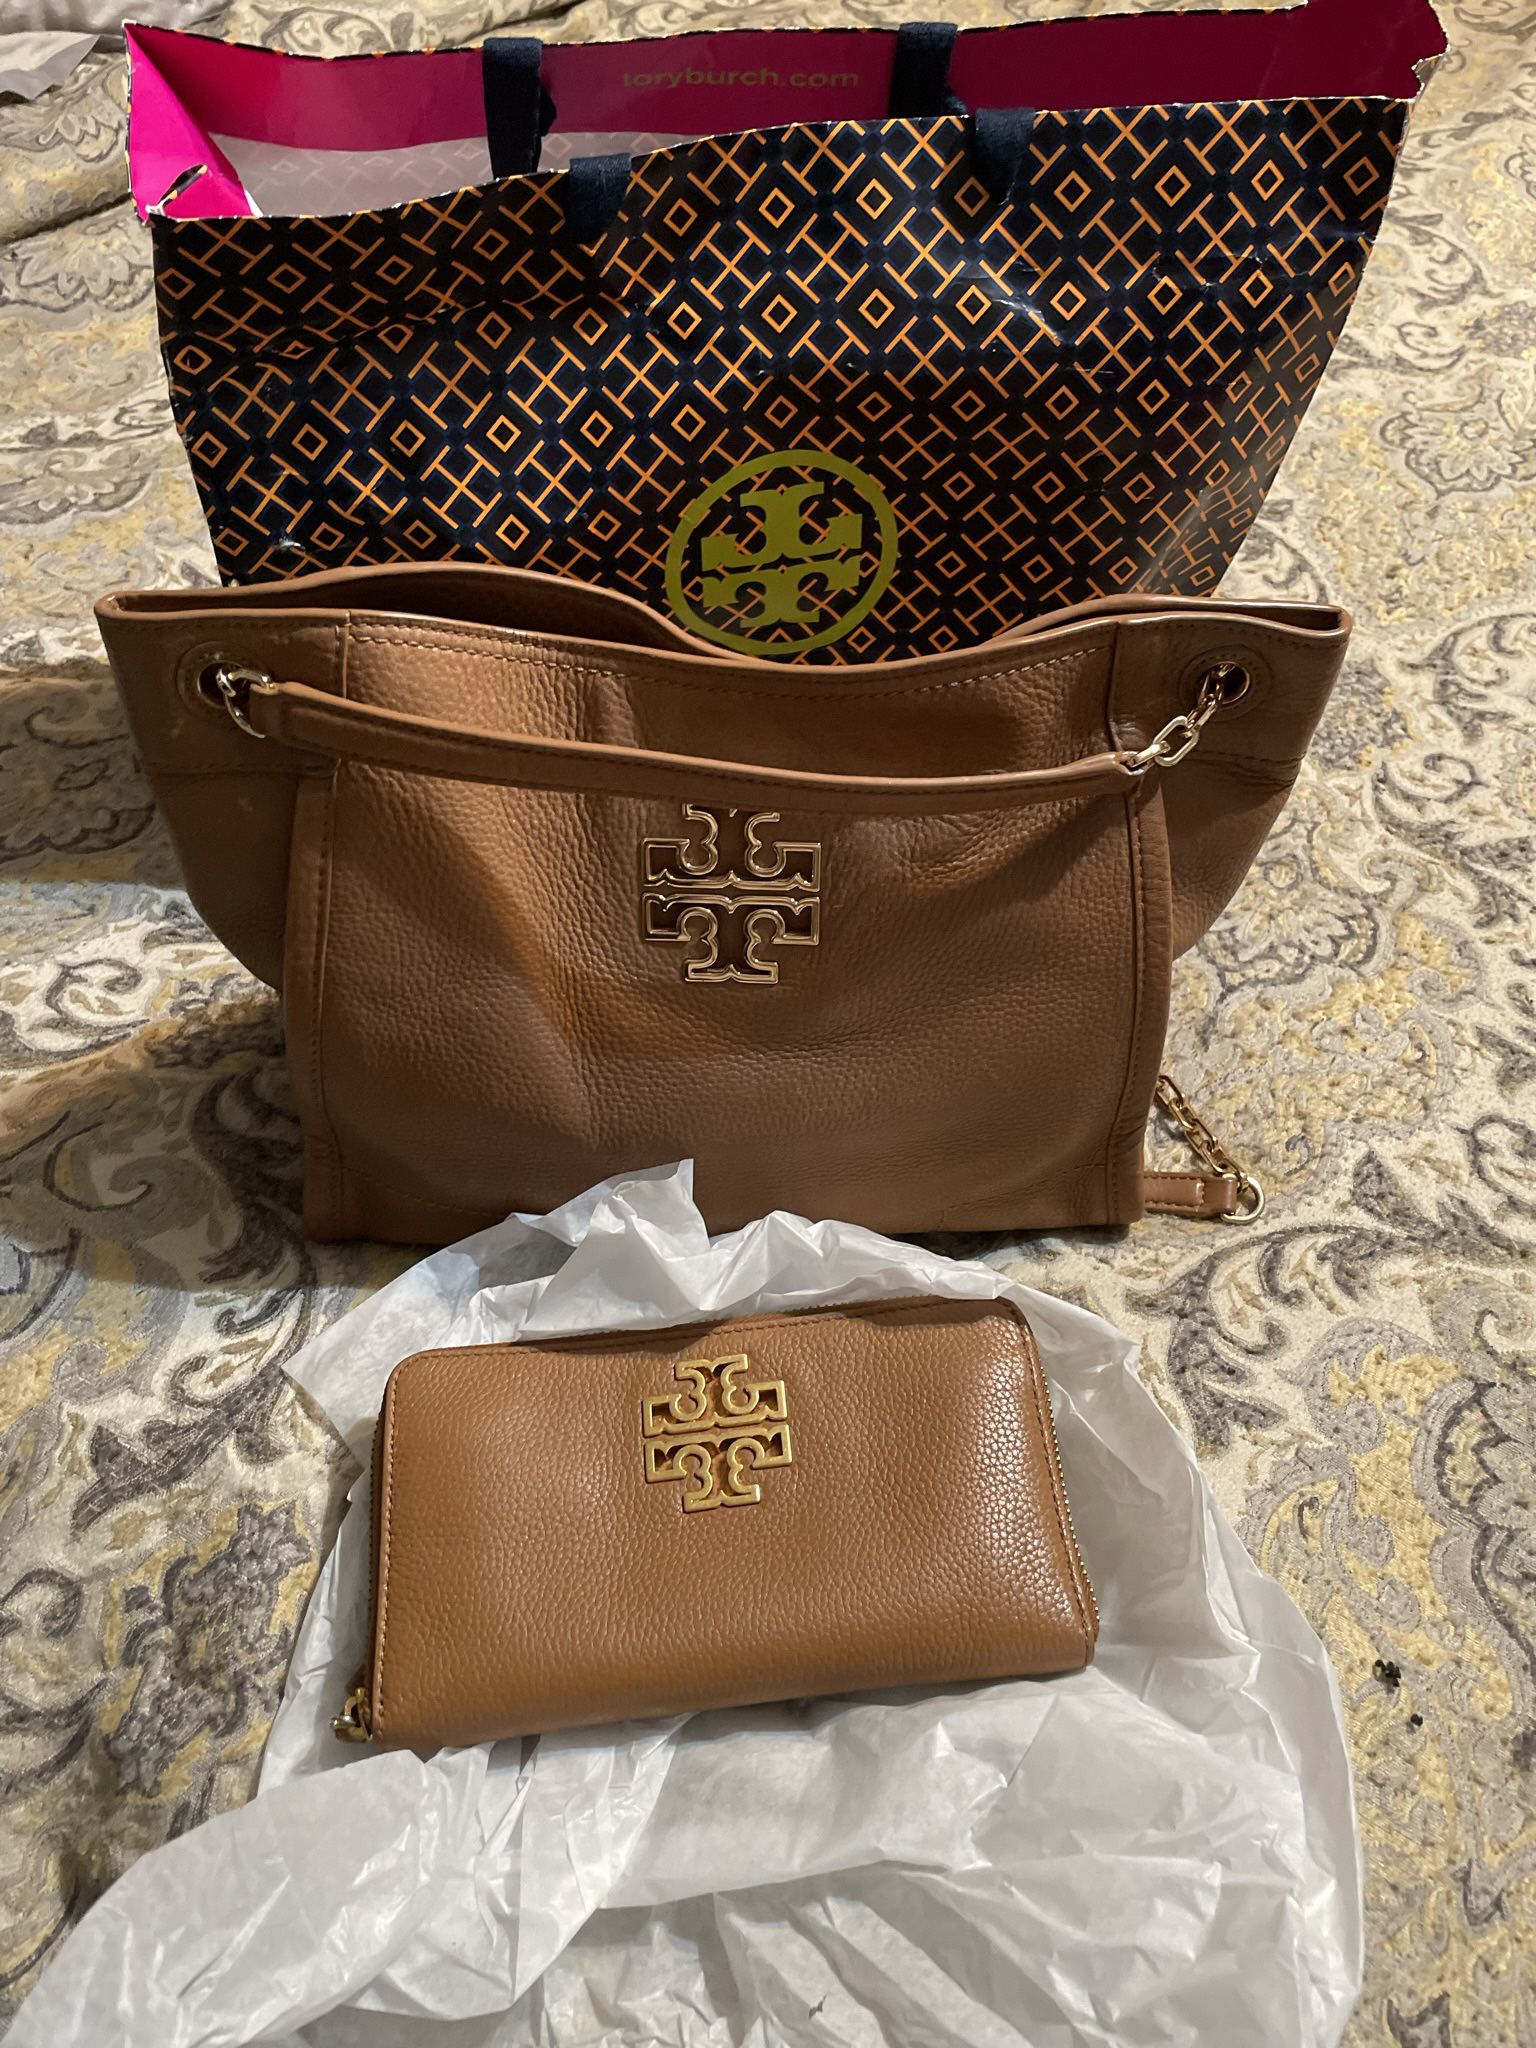 Like New Authentic Tory Burch Large Handbag And Wallet Set